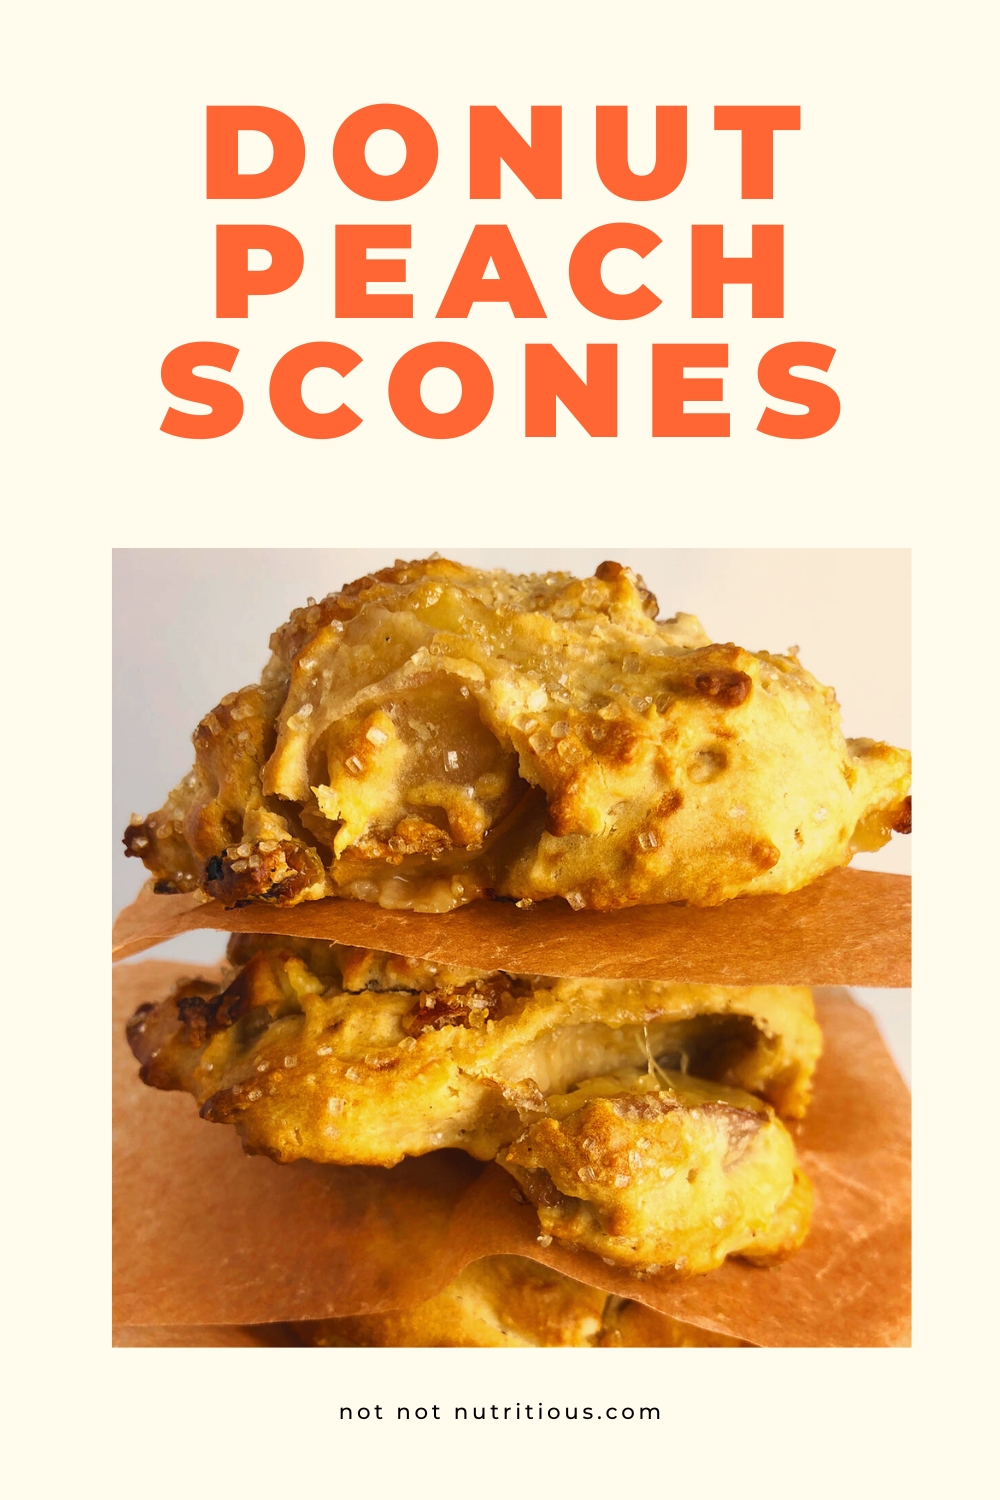 Pin for Donut Peach Scones, wide side-view of scones stacked between paper